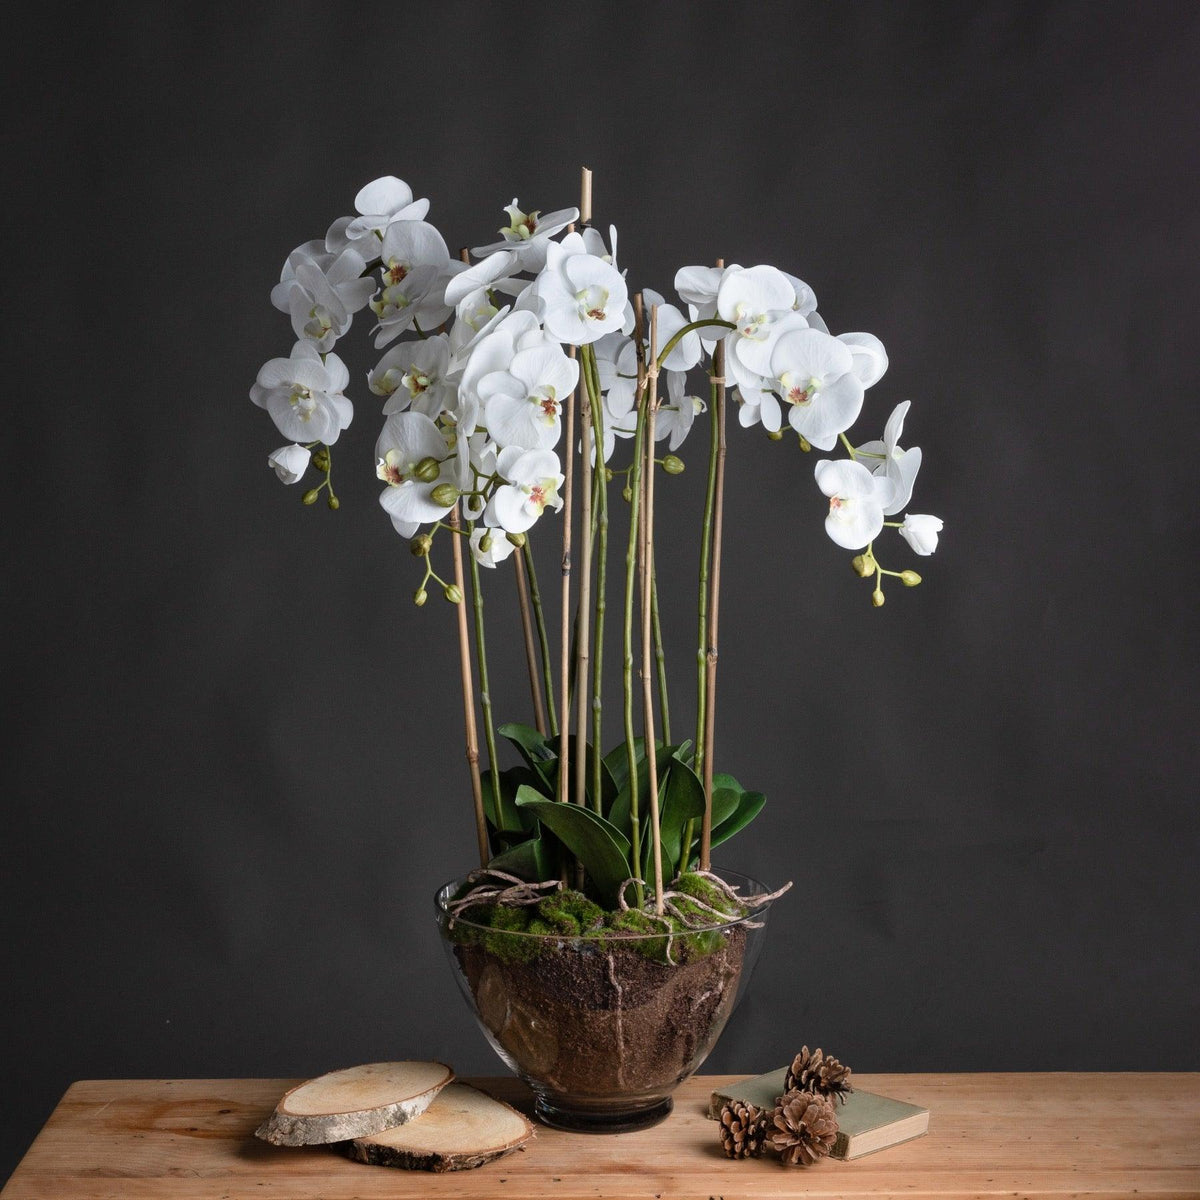 Large White Orchid In Glass Pot - Vookoo Lifestyle